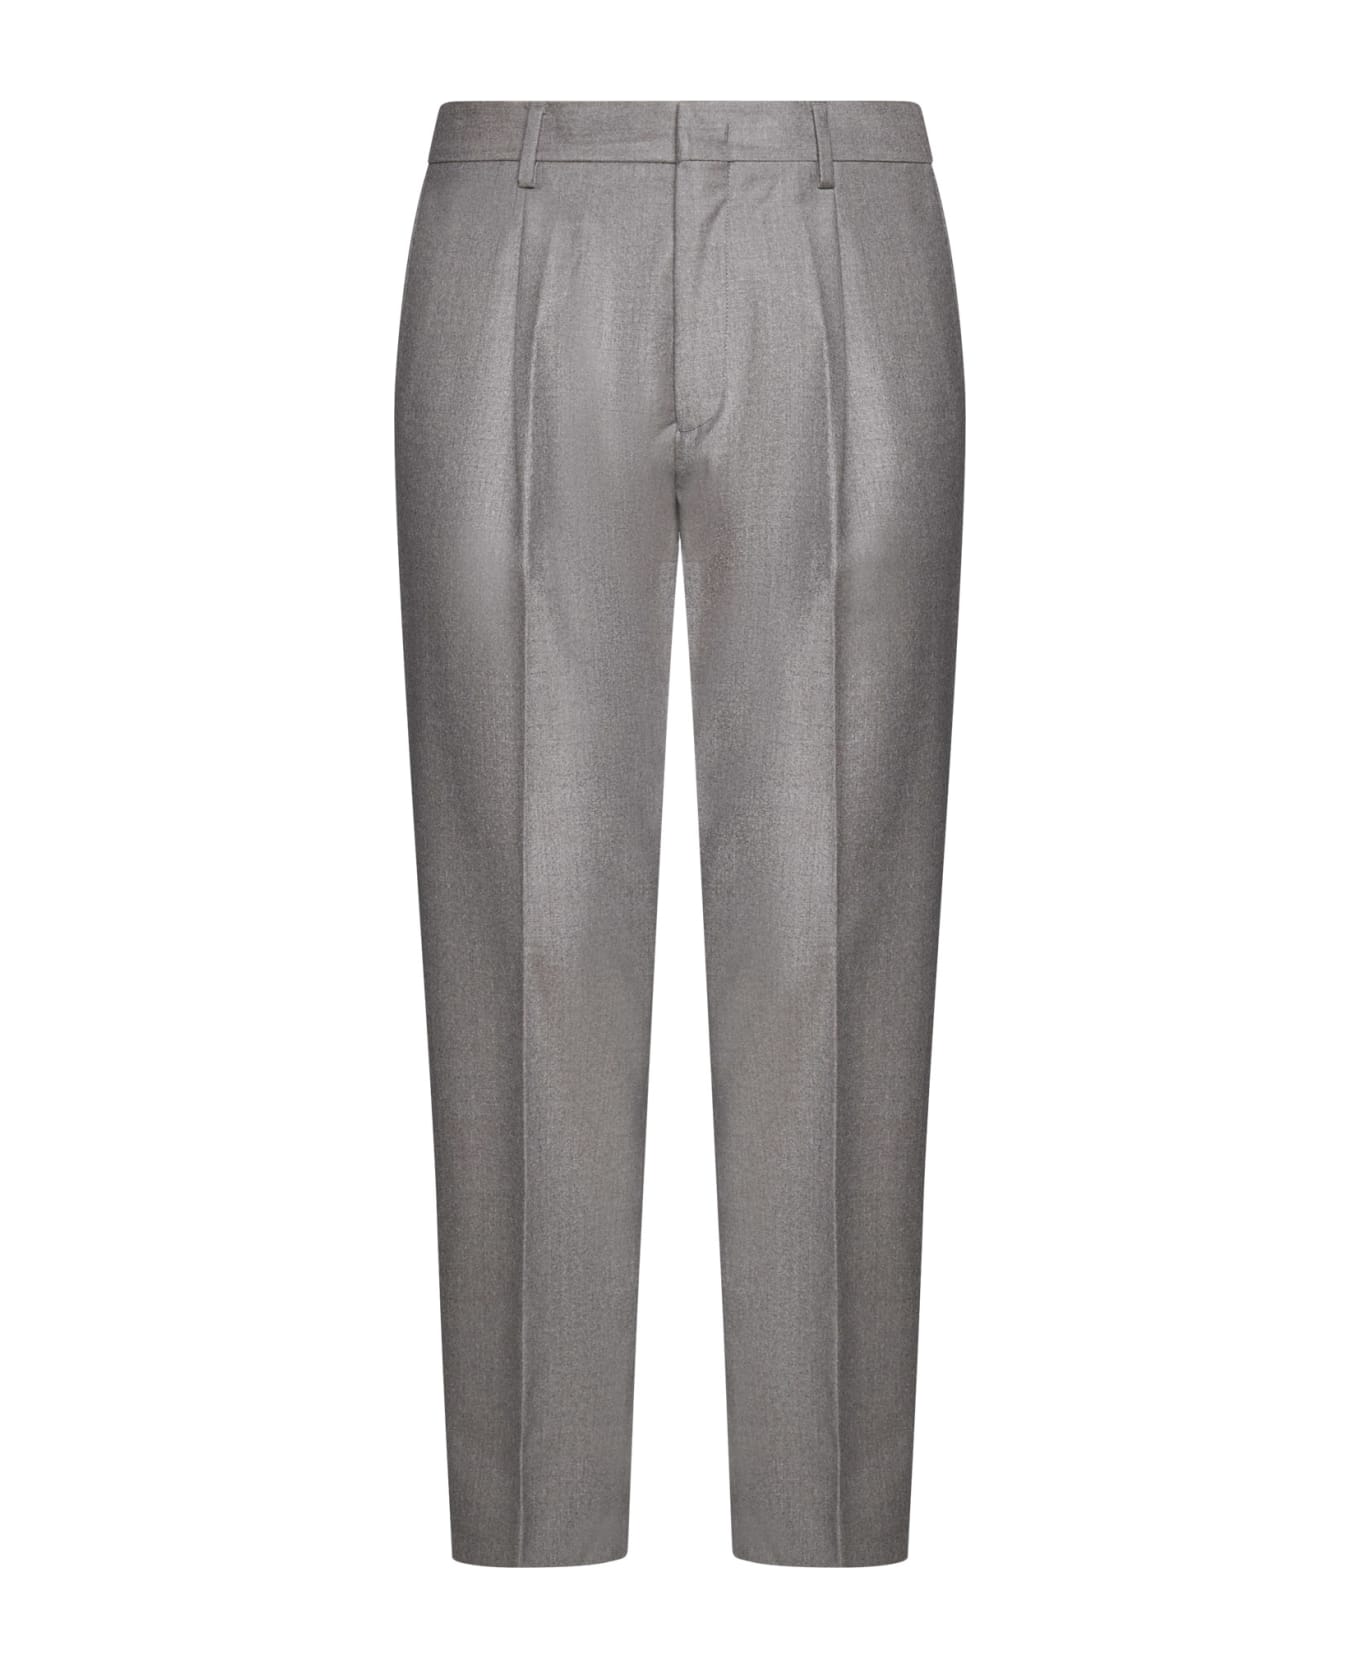 Low Brand Pants - Taupe